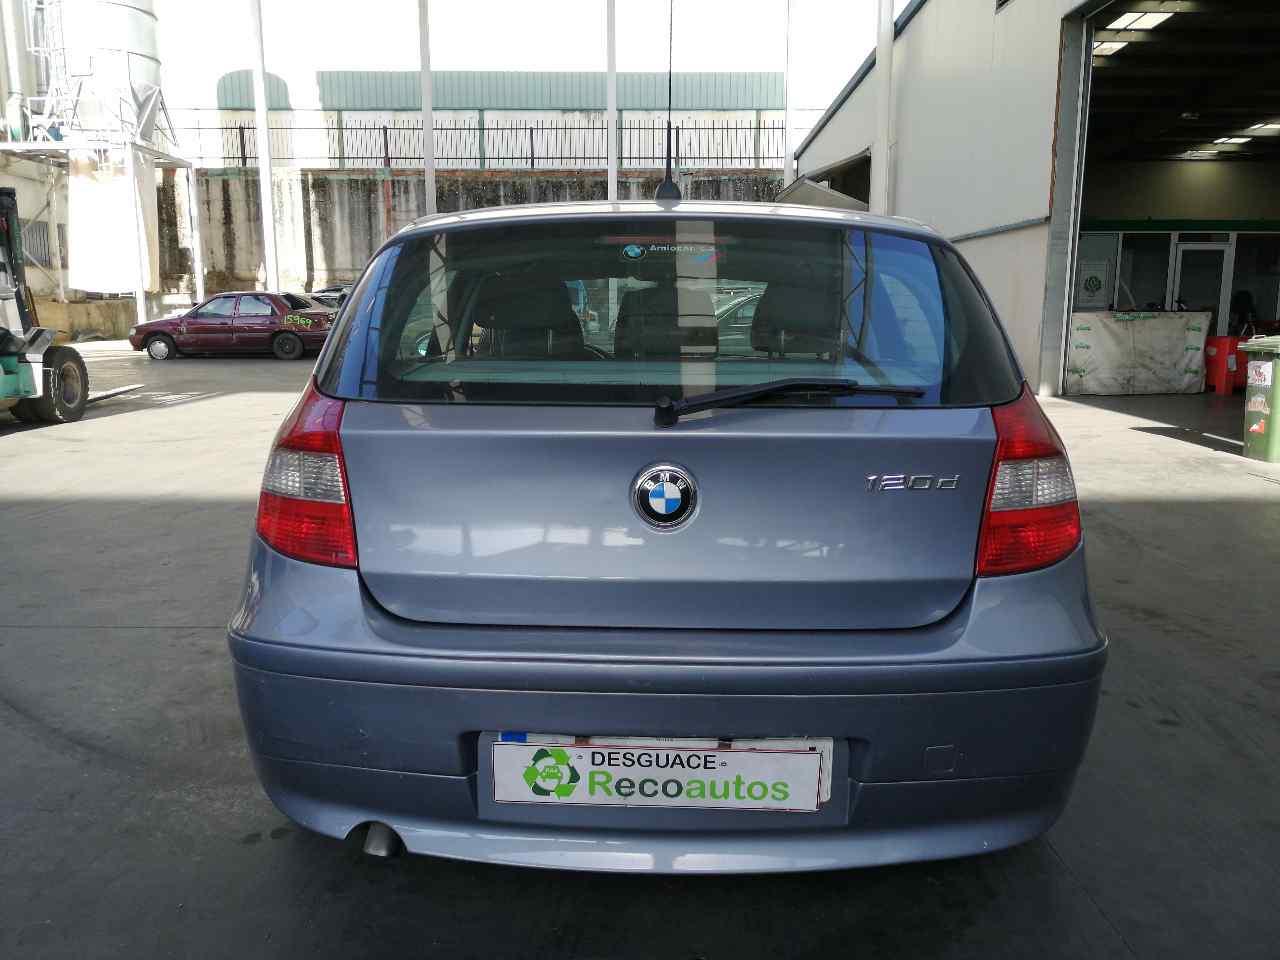 BMW 1 Series F20/F21 (2011-2020) Right Side Wing Mirror 51167268124, 5PINES, AZUL5PUERTAS 19827636